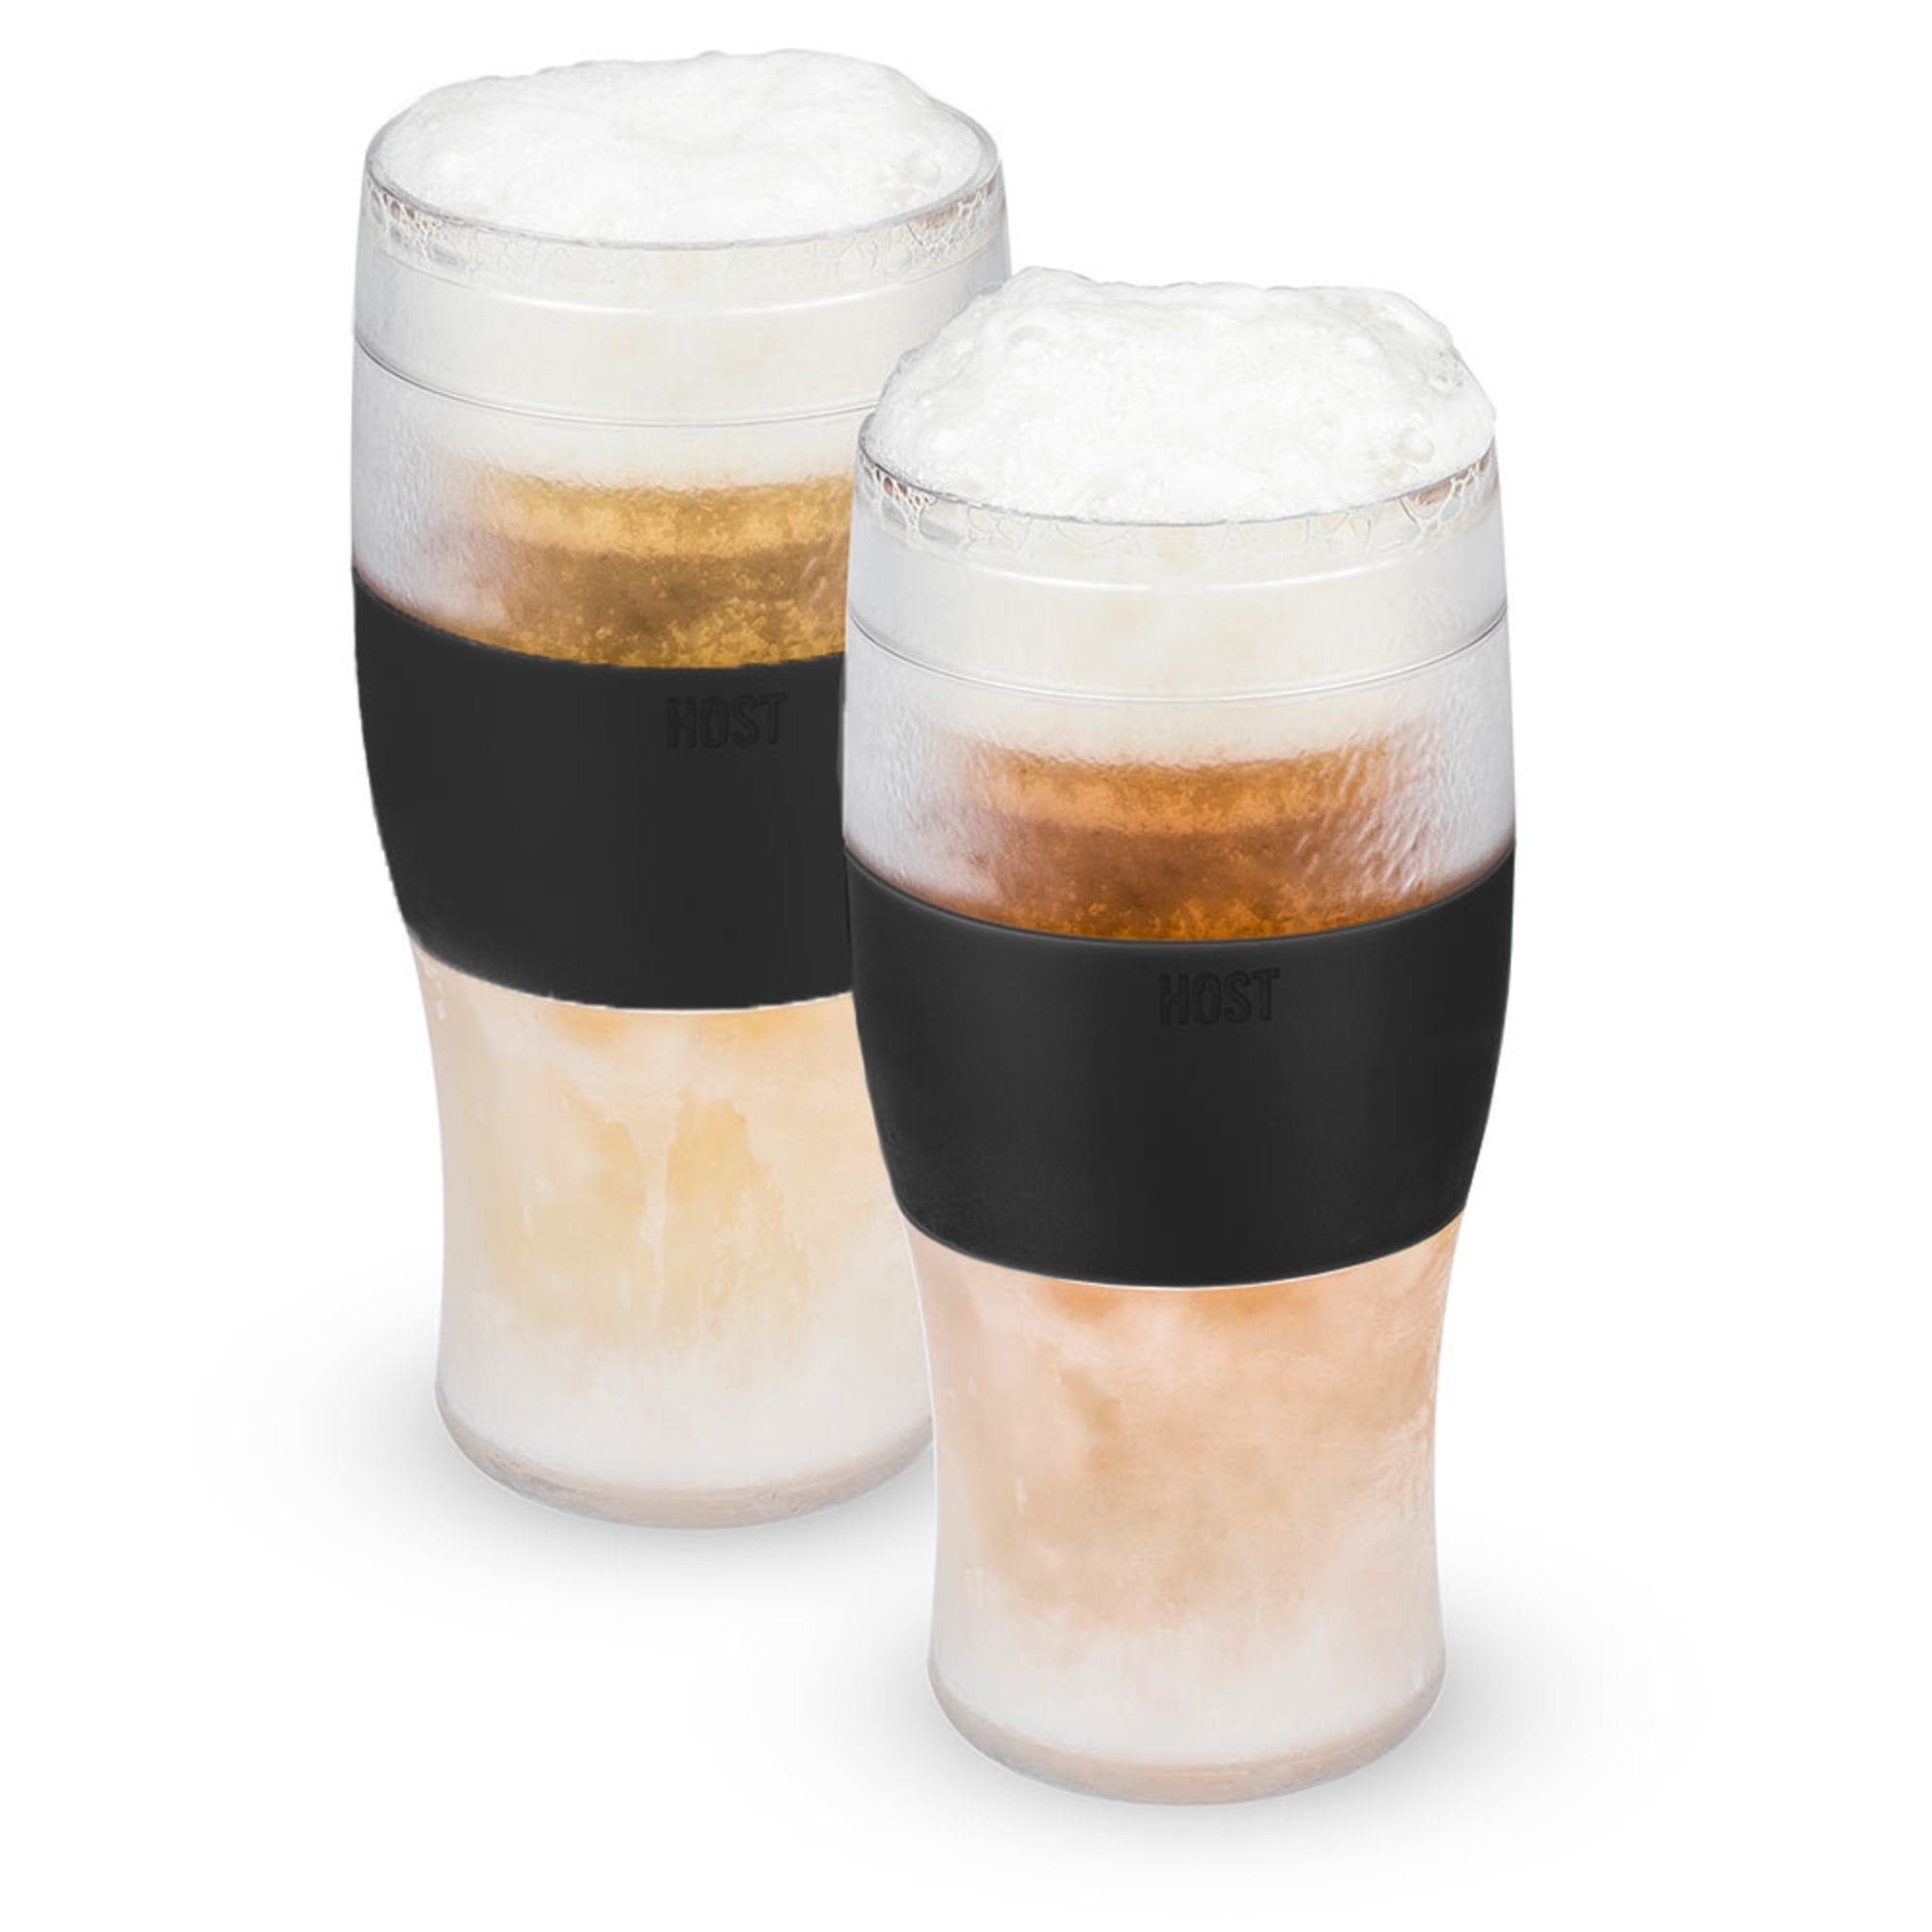 Muffin Top Nucleated Beer Glasses - Pint Glass - Cider, Soda, Tea (Transparent/Clear) by Brewing America, Size: One Size